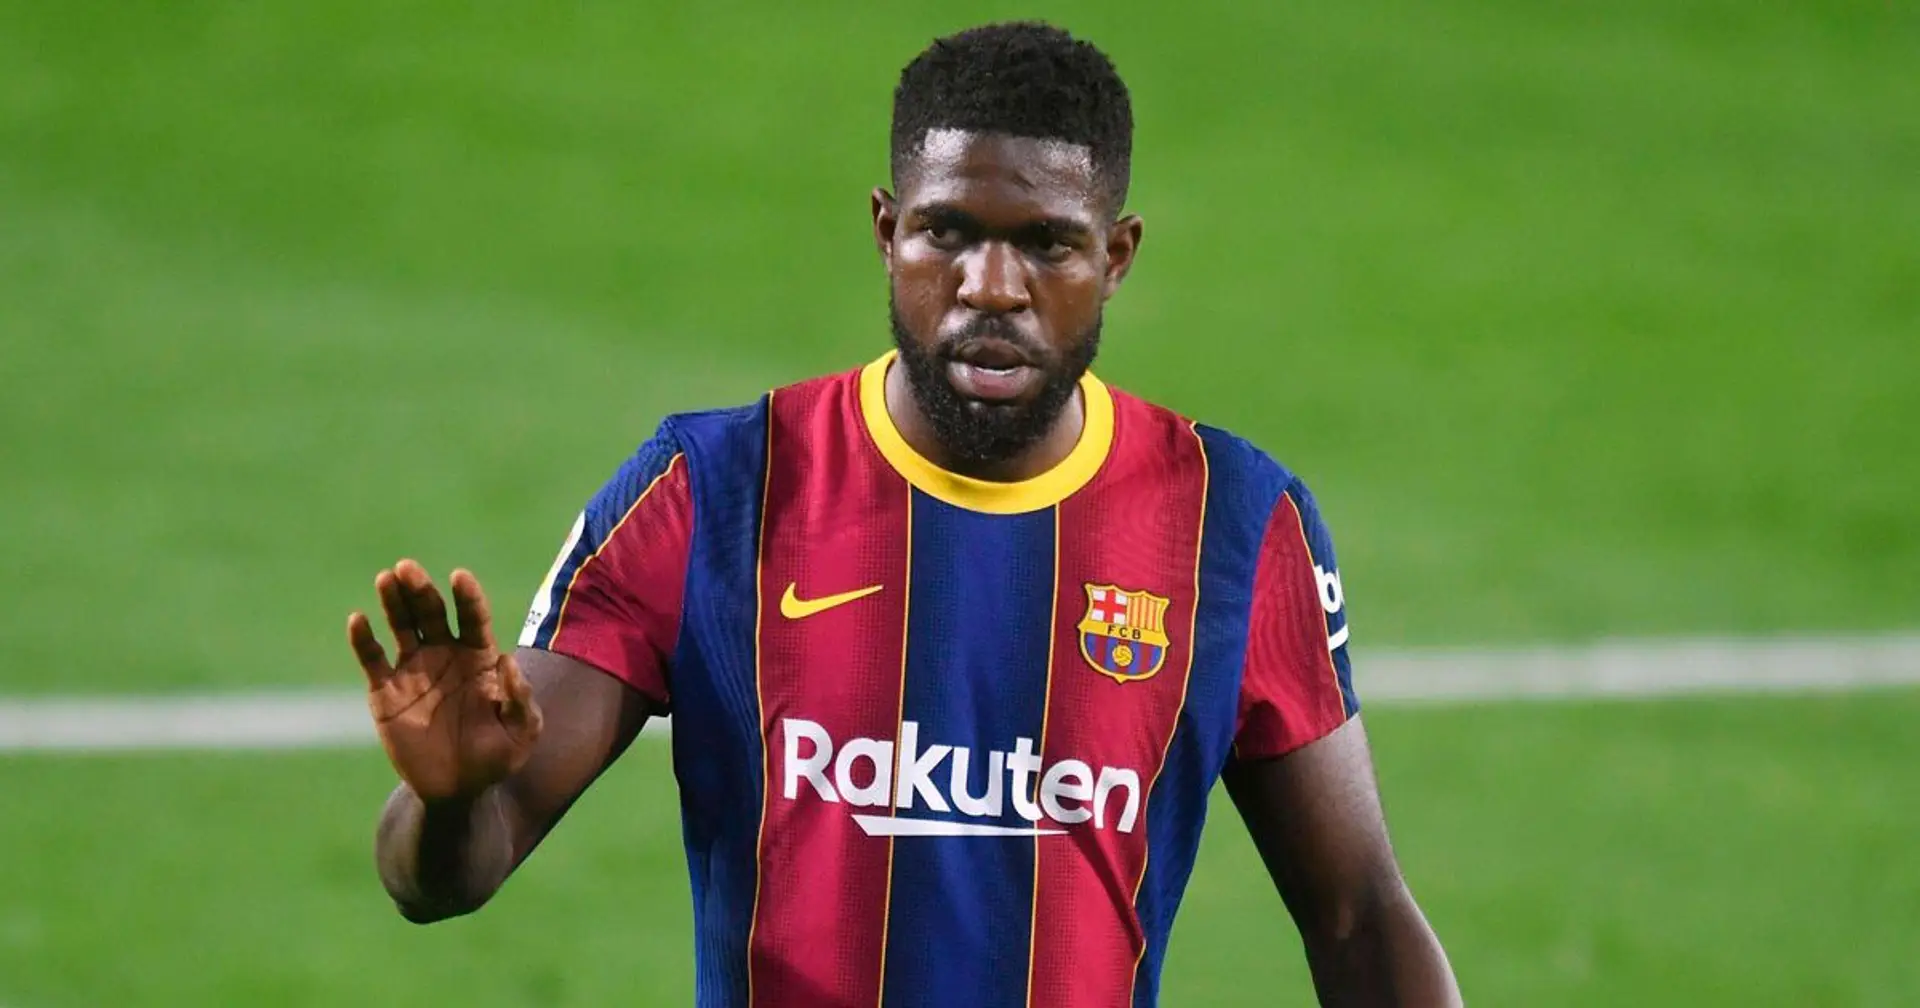 Zenit interested in signing Umtiti, player has other offers on the table (reliability: 5 stars)